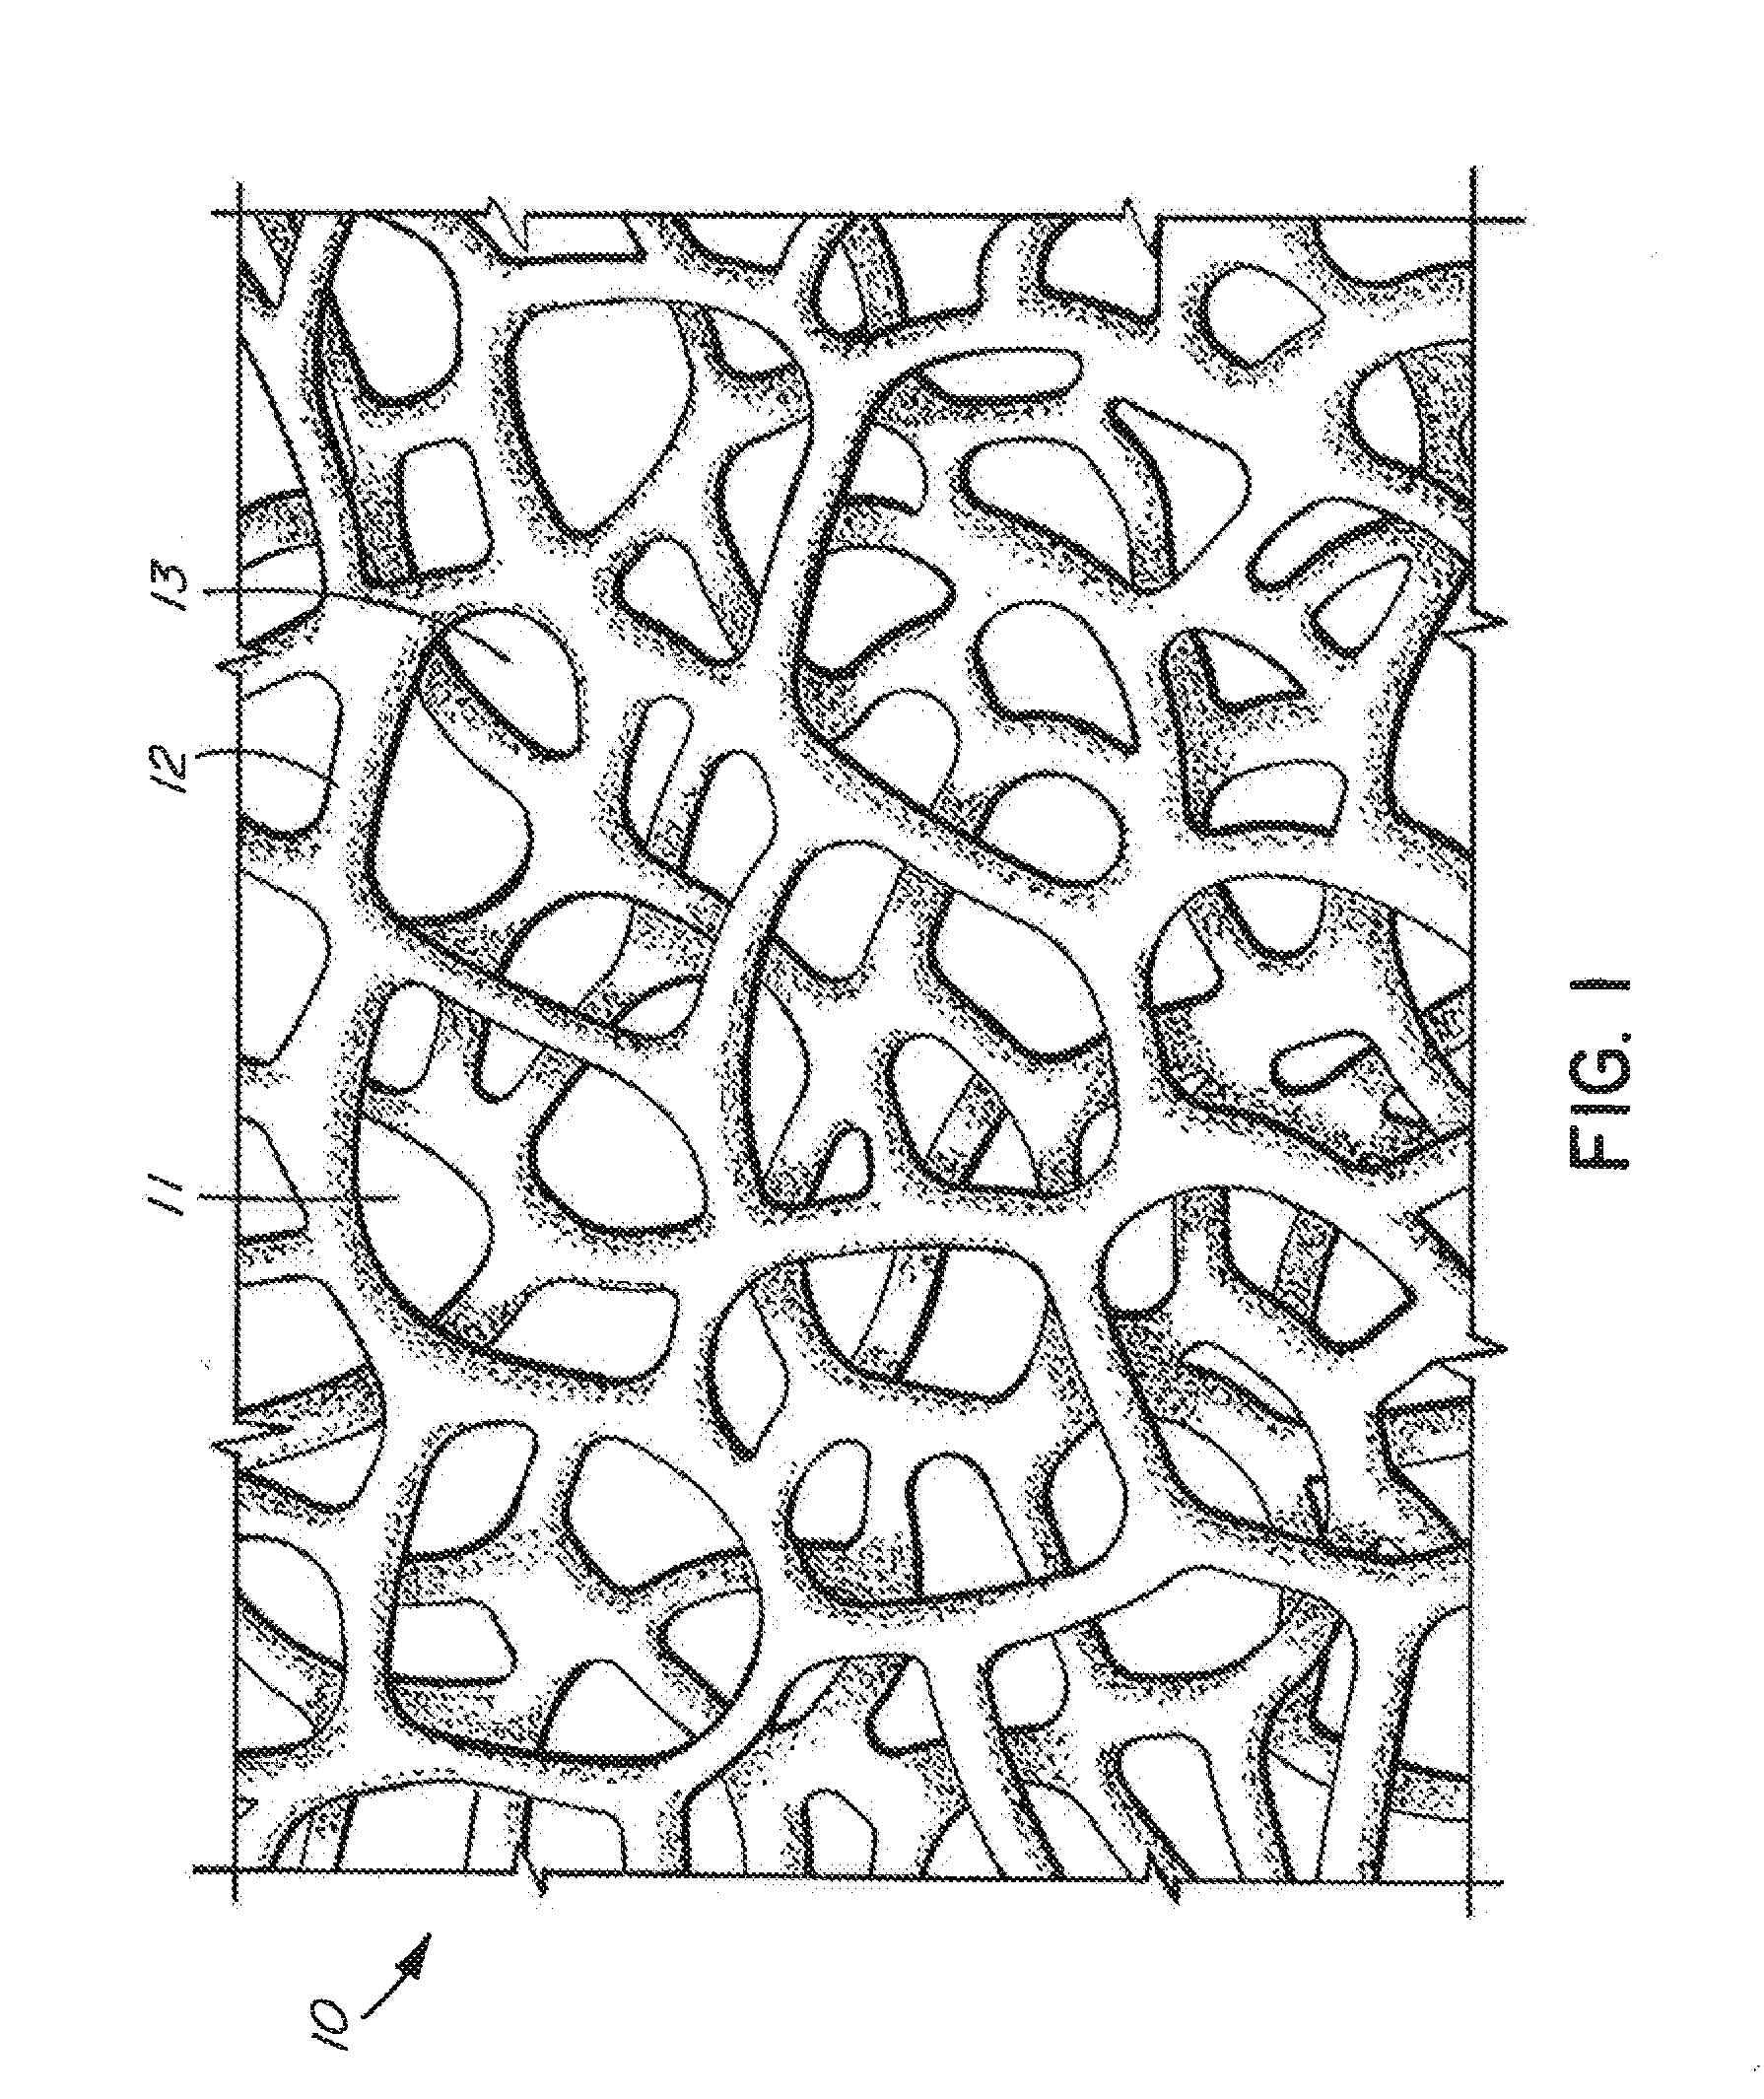 Reticulated open-cell foam modified by fibers extending across and between the cells of said foam and preparation methods thereof